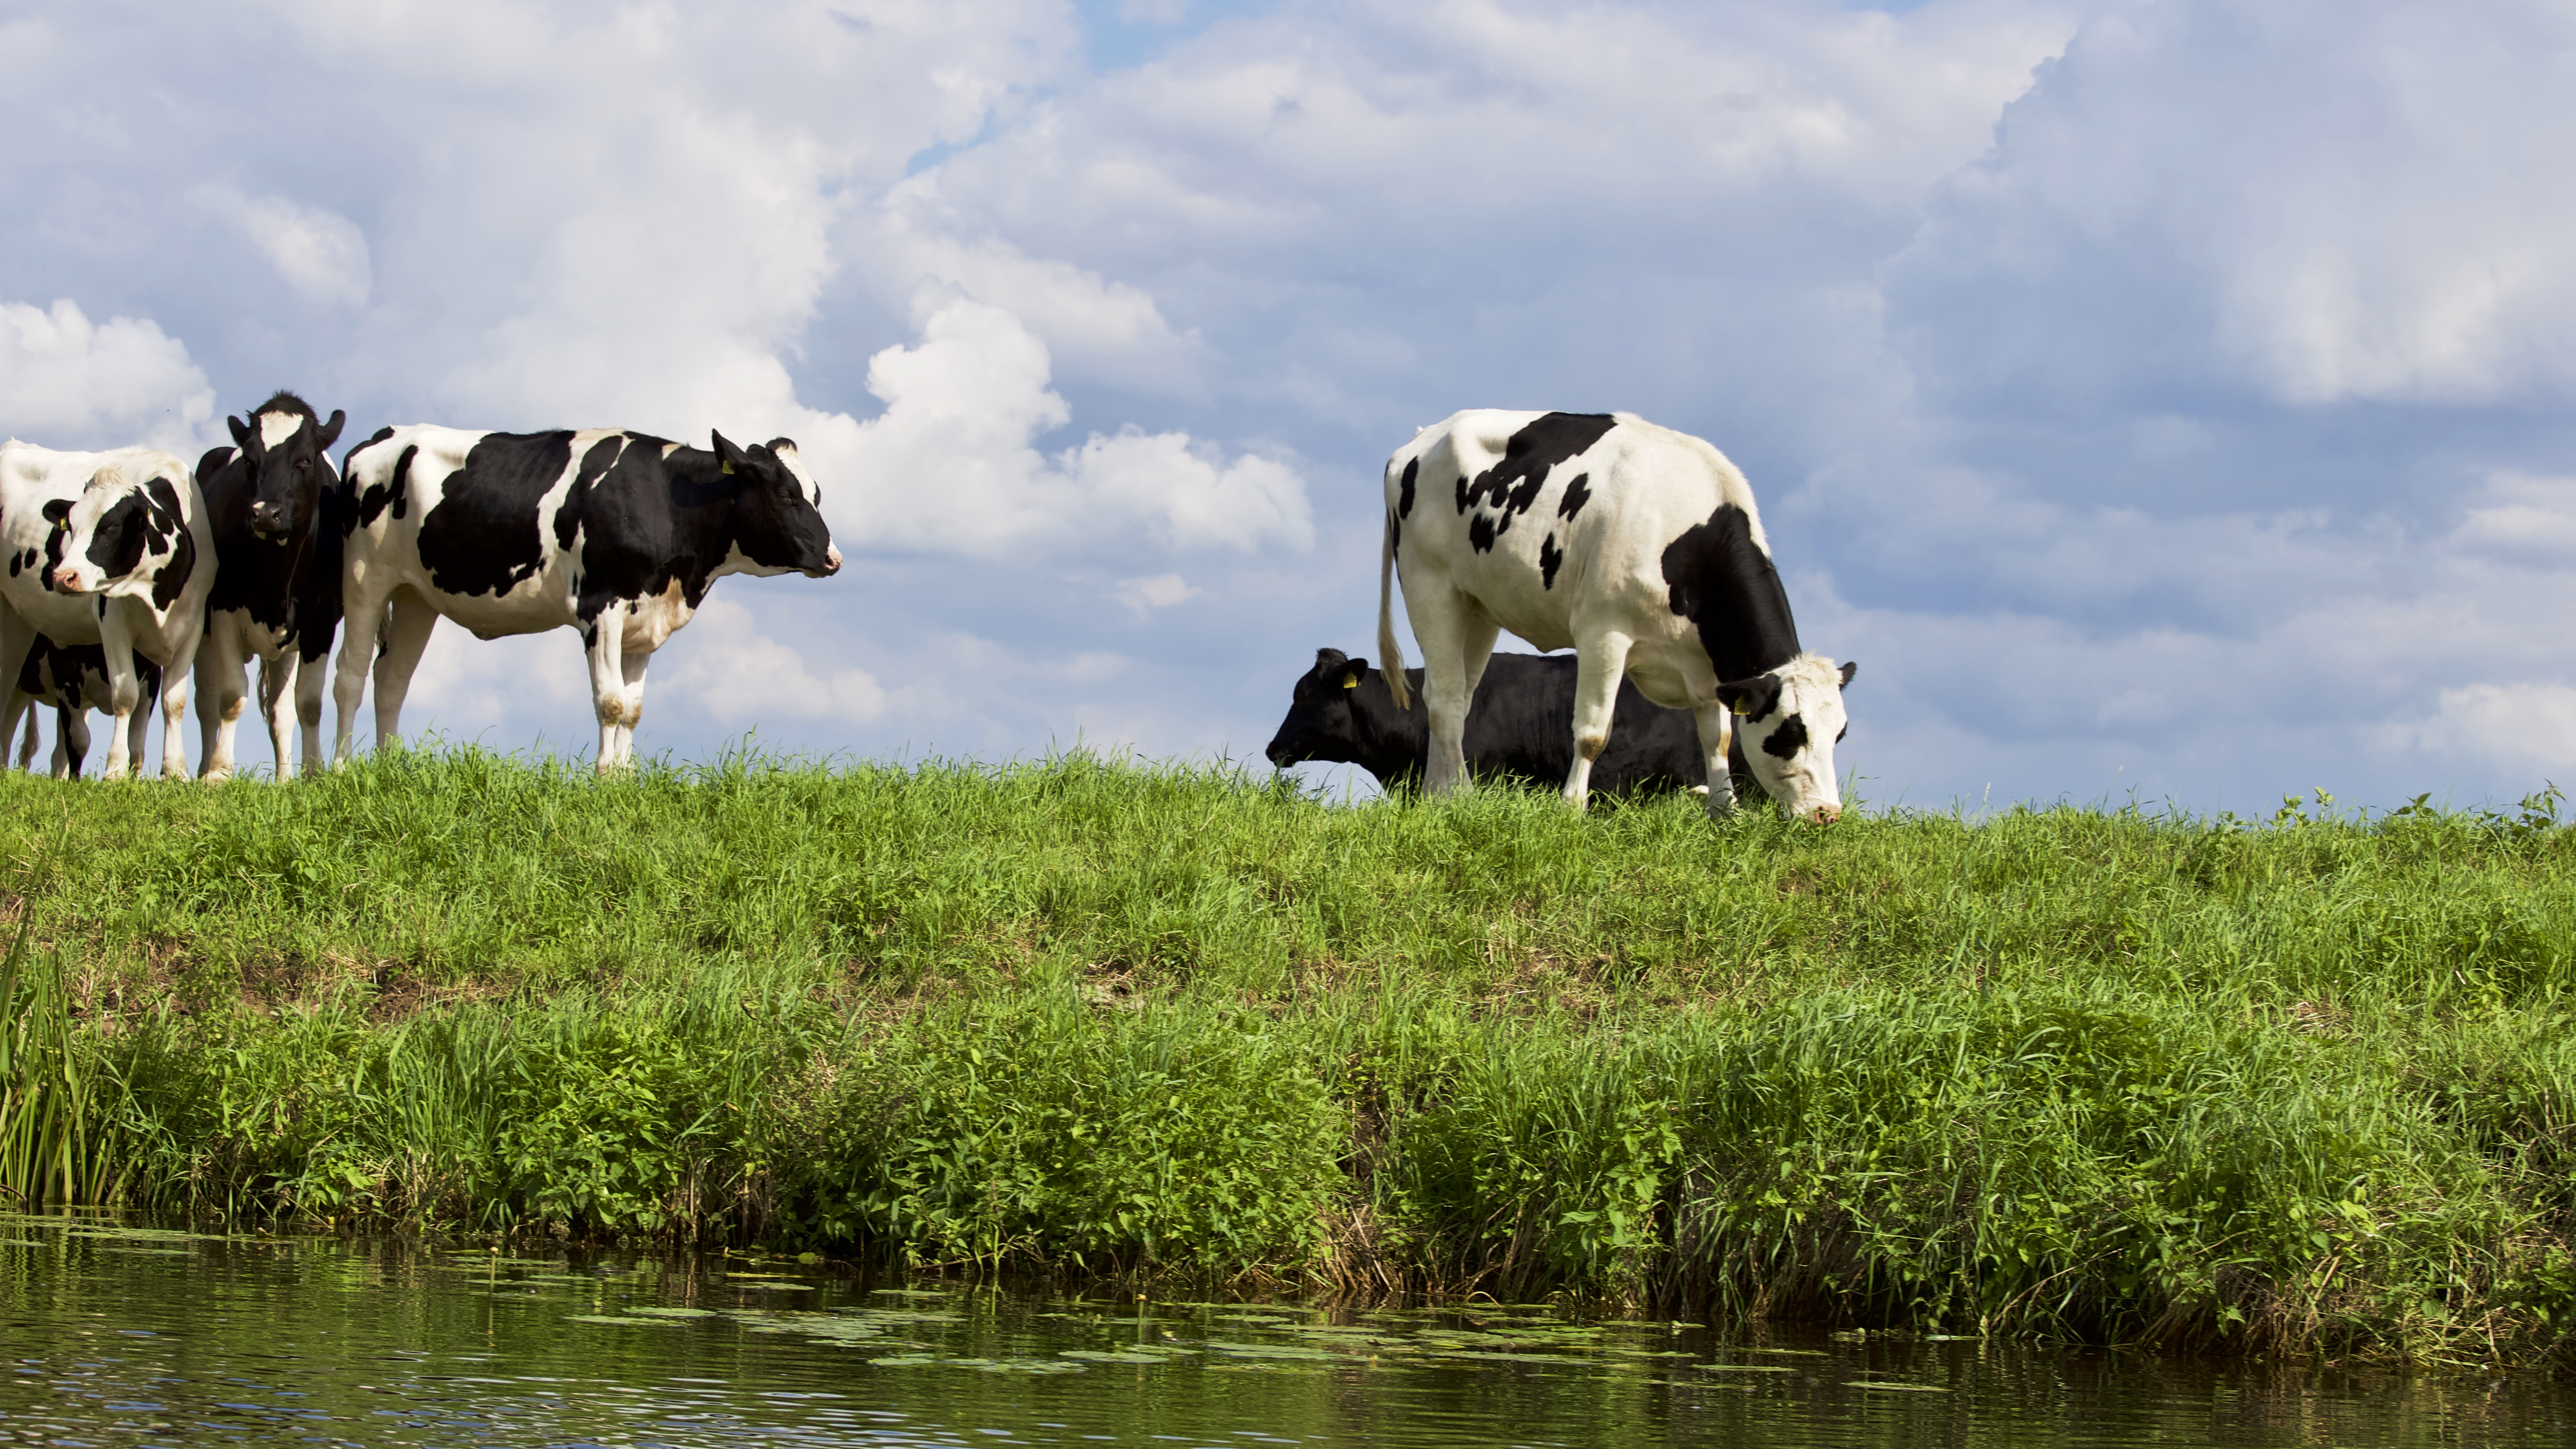 What Should Farmers Know About Climate Change? Livestock & Carbon Sequestration